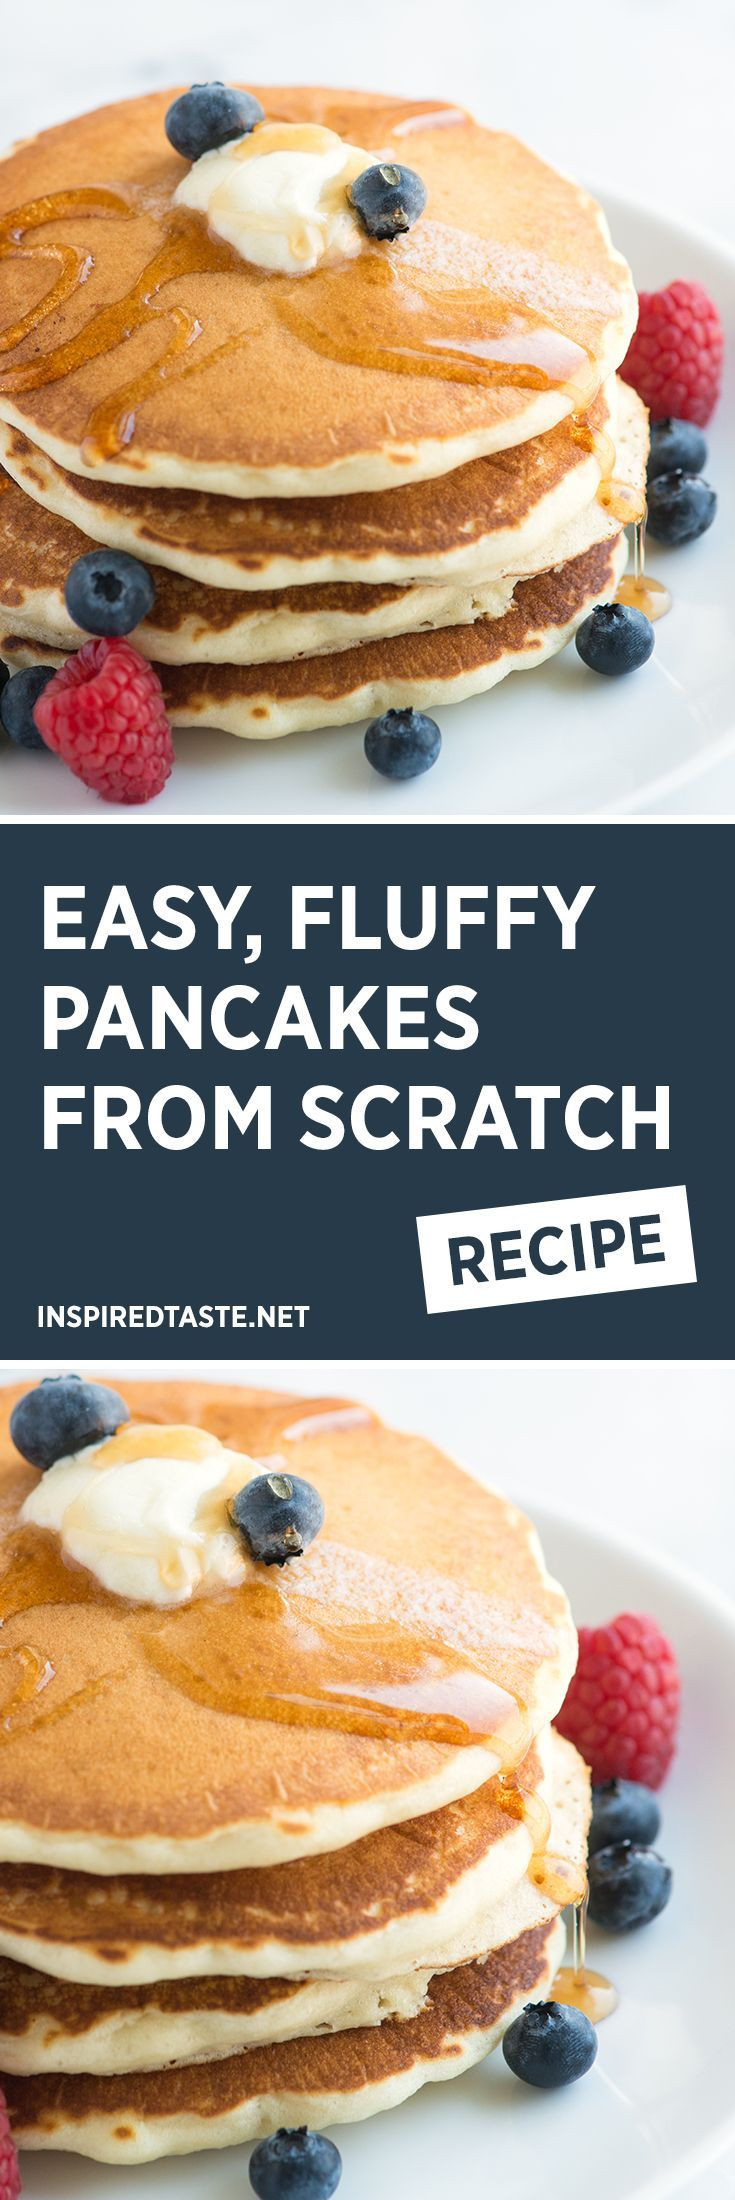 Easy Pancakes From Scratch
 Easy Fluffy Pancakes Recipe from Scratch Recipe